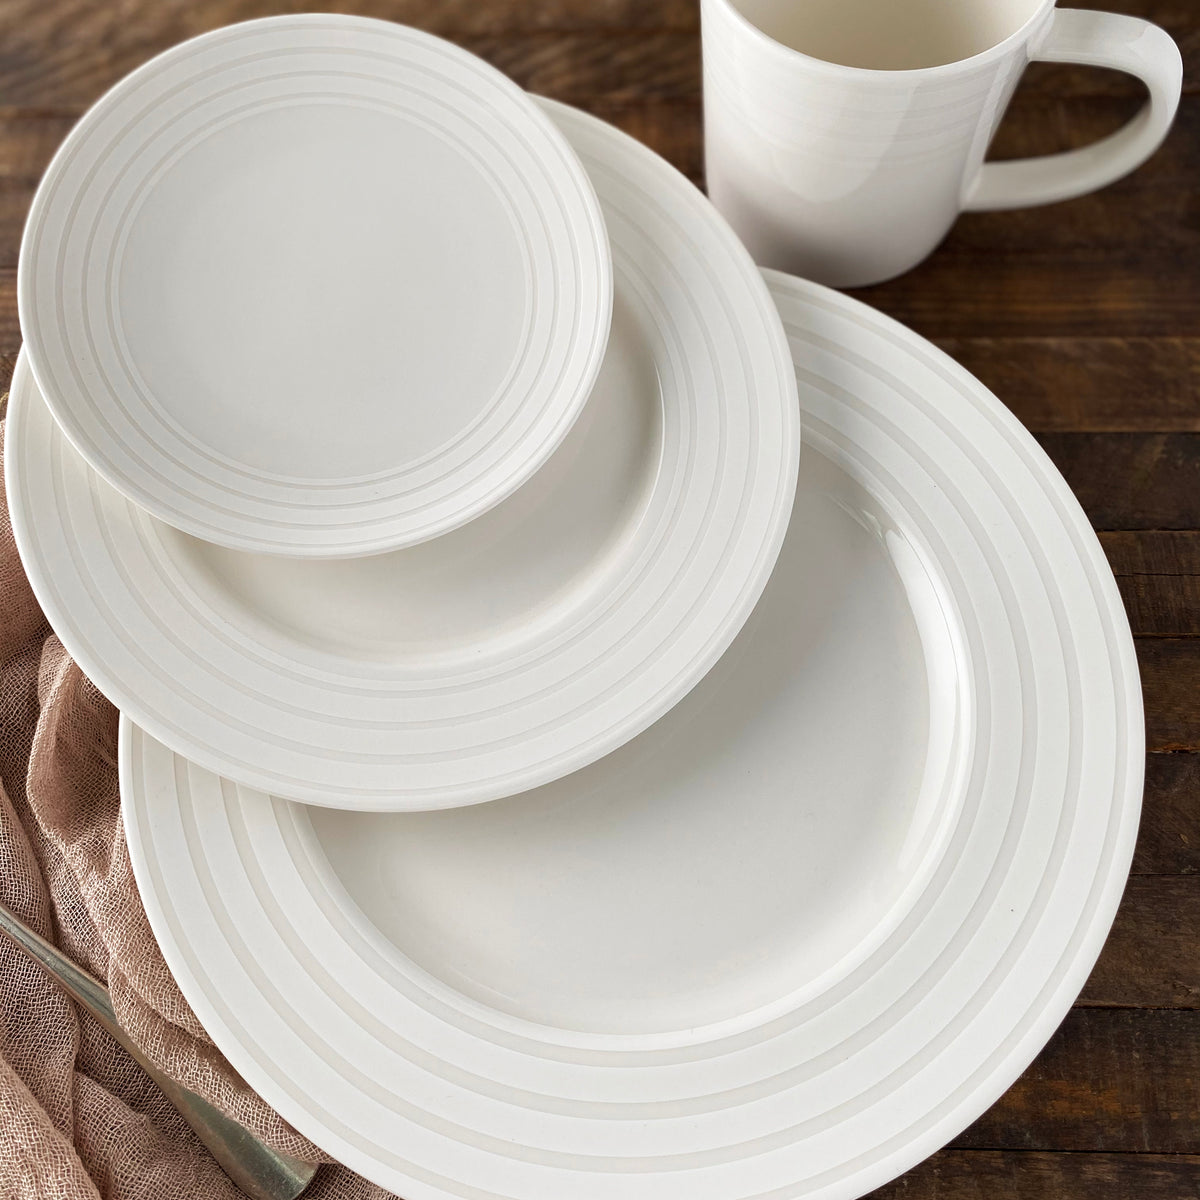 A close-up of a set of three Cambridge Stripe Rimmed Dinner Plates by Caskata Artisanal Home of varying sizes and a white mug, all showcasing timeless dinnerware design, arranged on a wooden surface next to a pink cloth napkin and a fork.